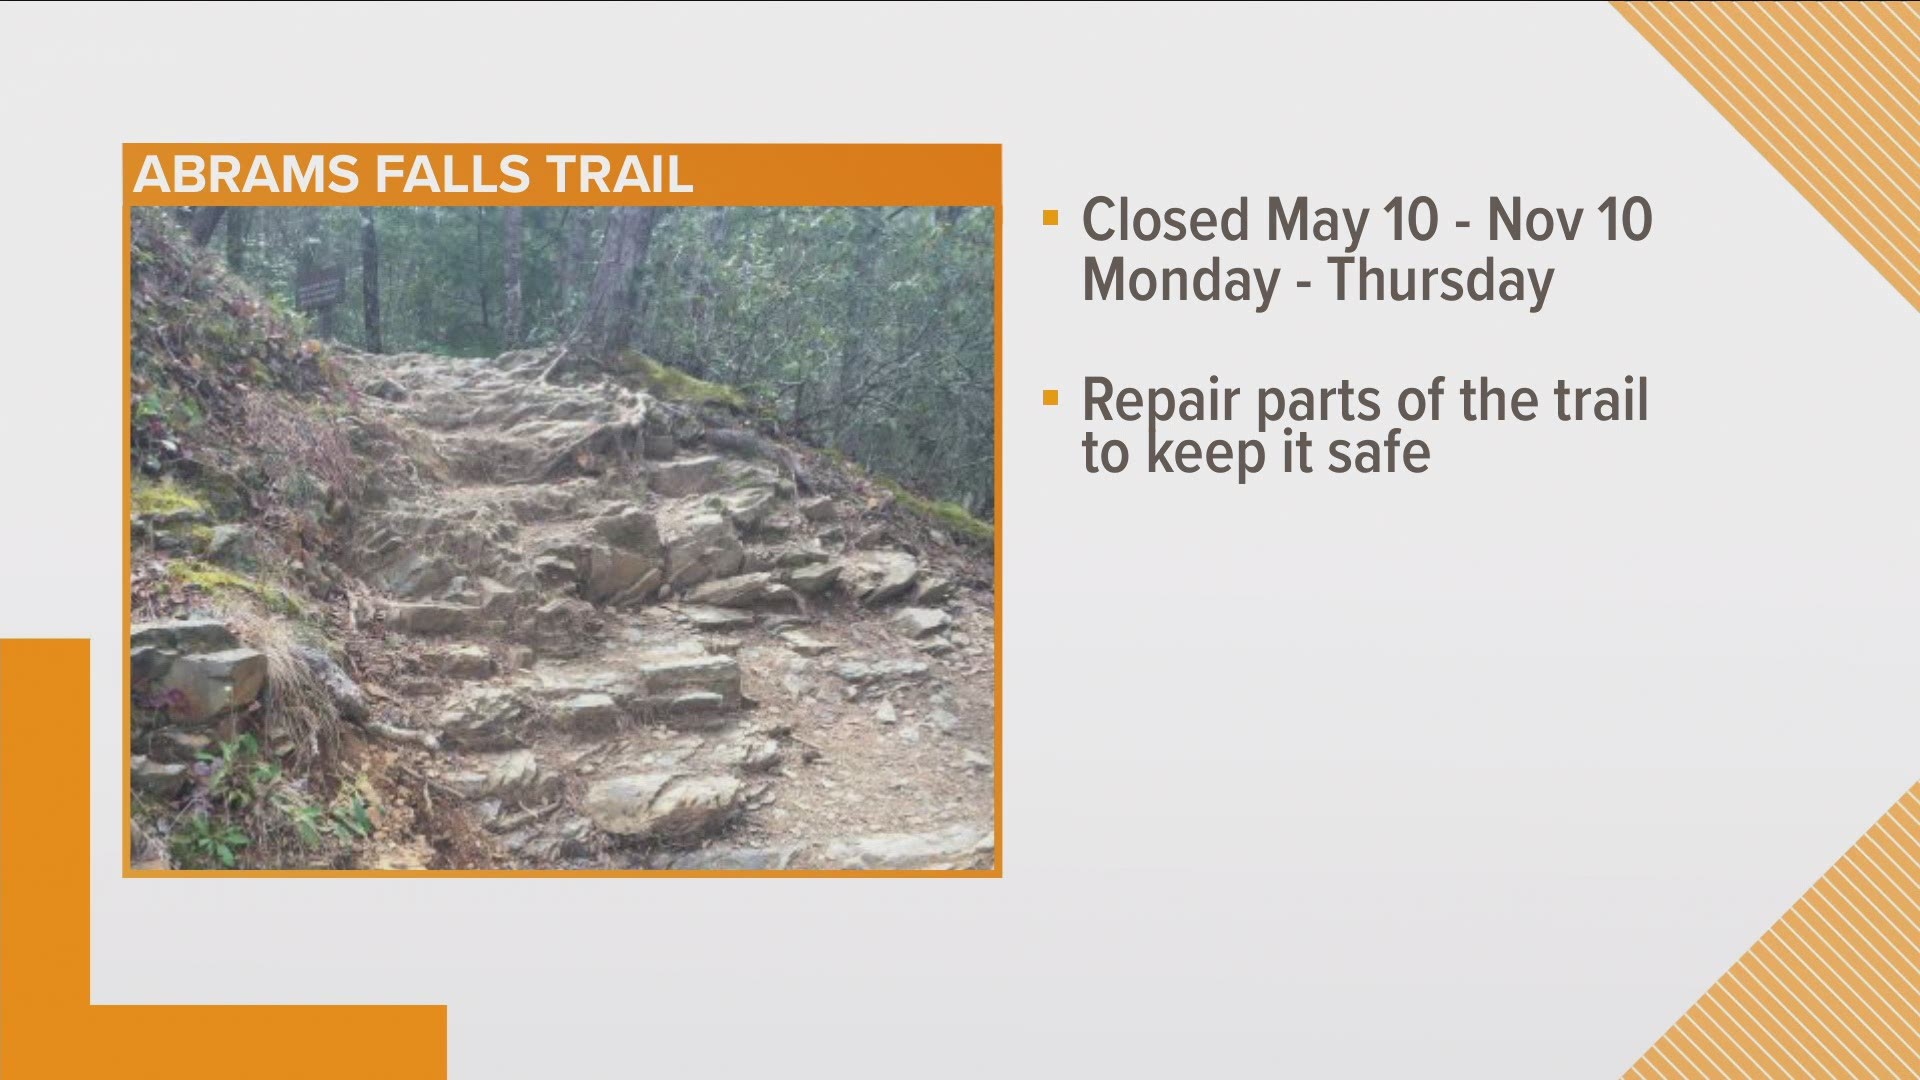 Starting on May 10, the trail and its parking areas will be closed to the public between Mondays at 7 a.m. through Thursday evenings at 5:30 p.m.